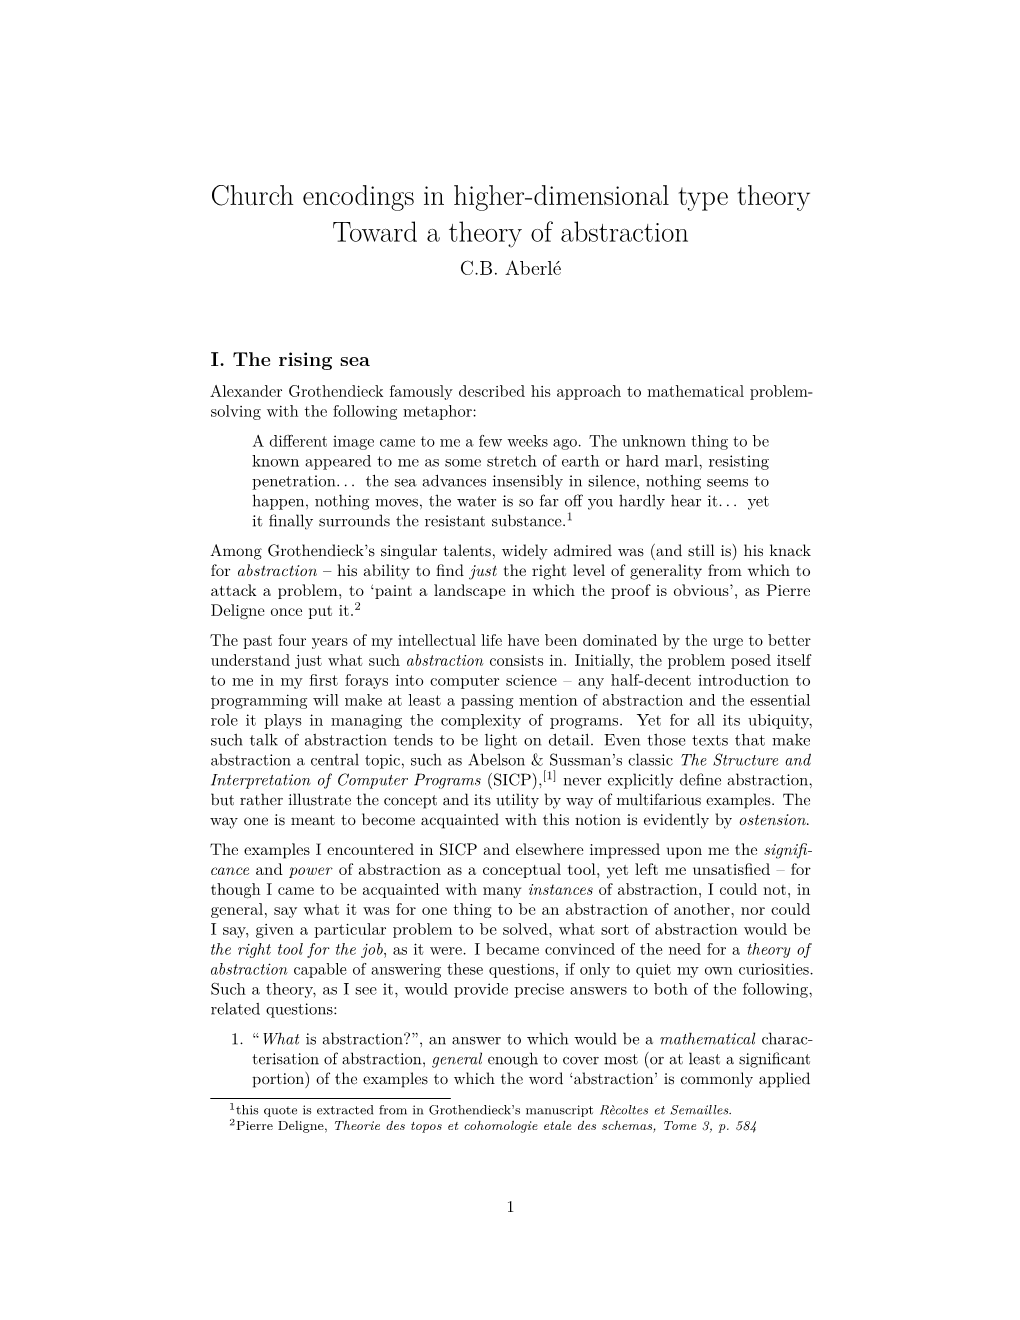 Church Encodings in Higher-Dimensional Type Theory Toward a Theory of Abstraction C.B